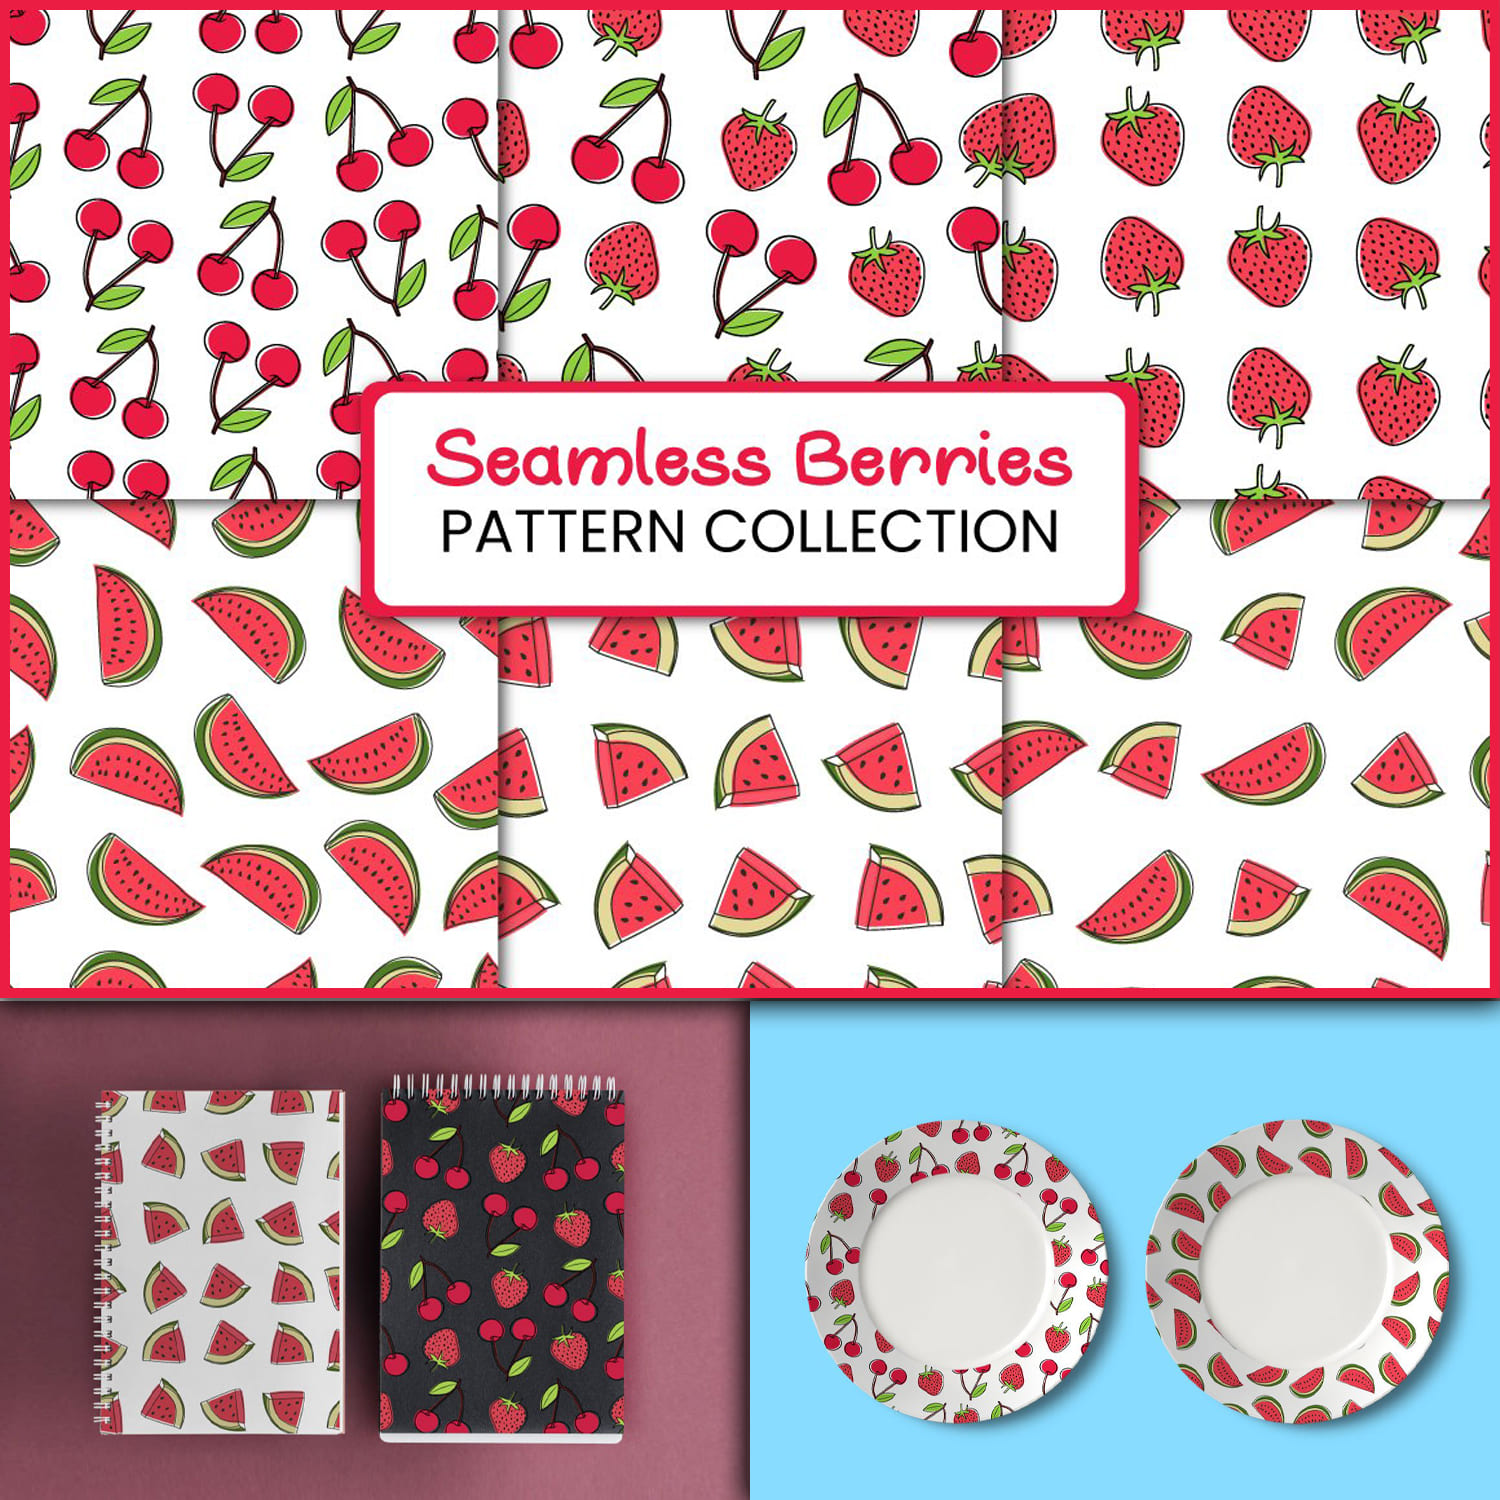 Prints with the image of cherries, strawberries, watermelons, etc.